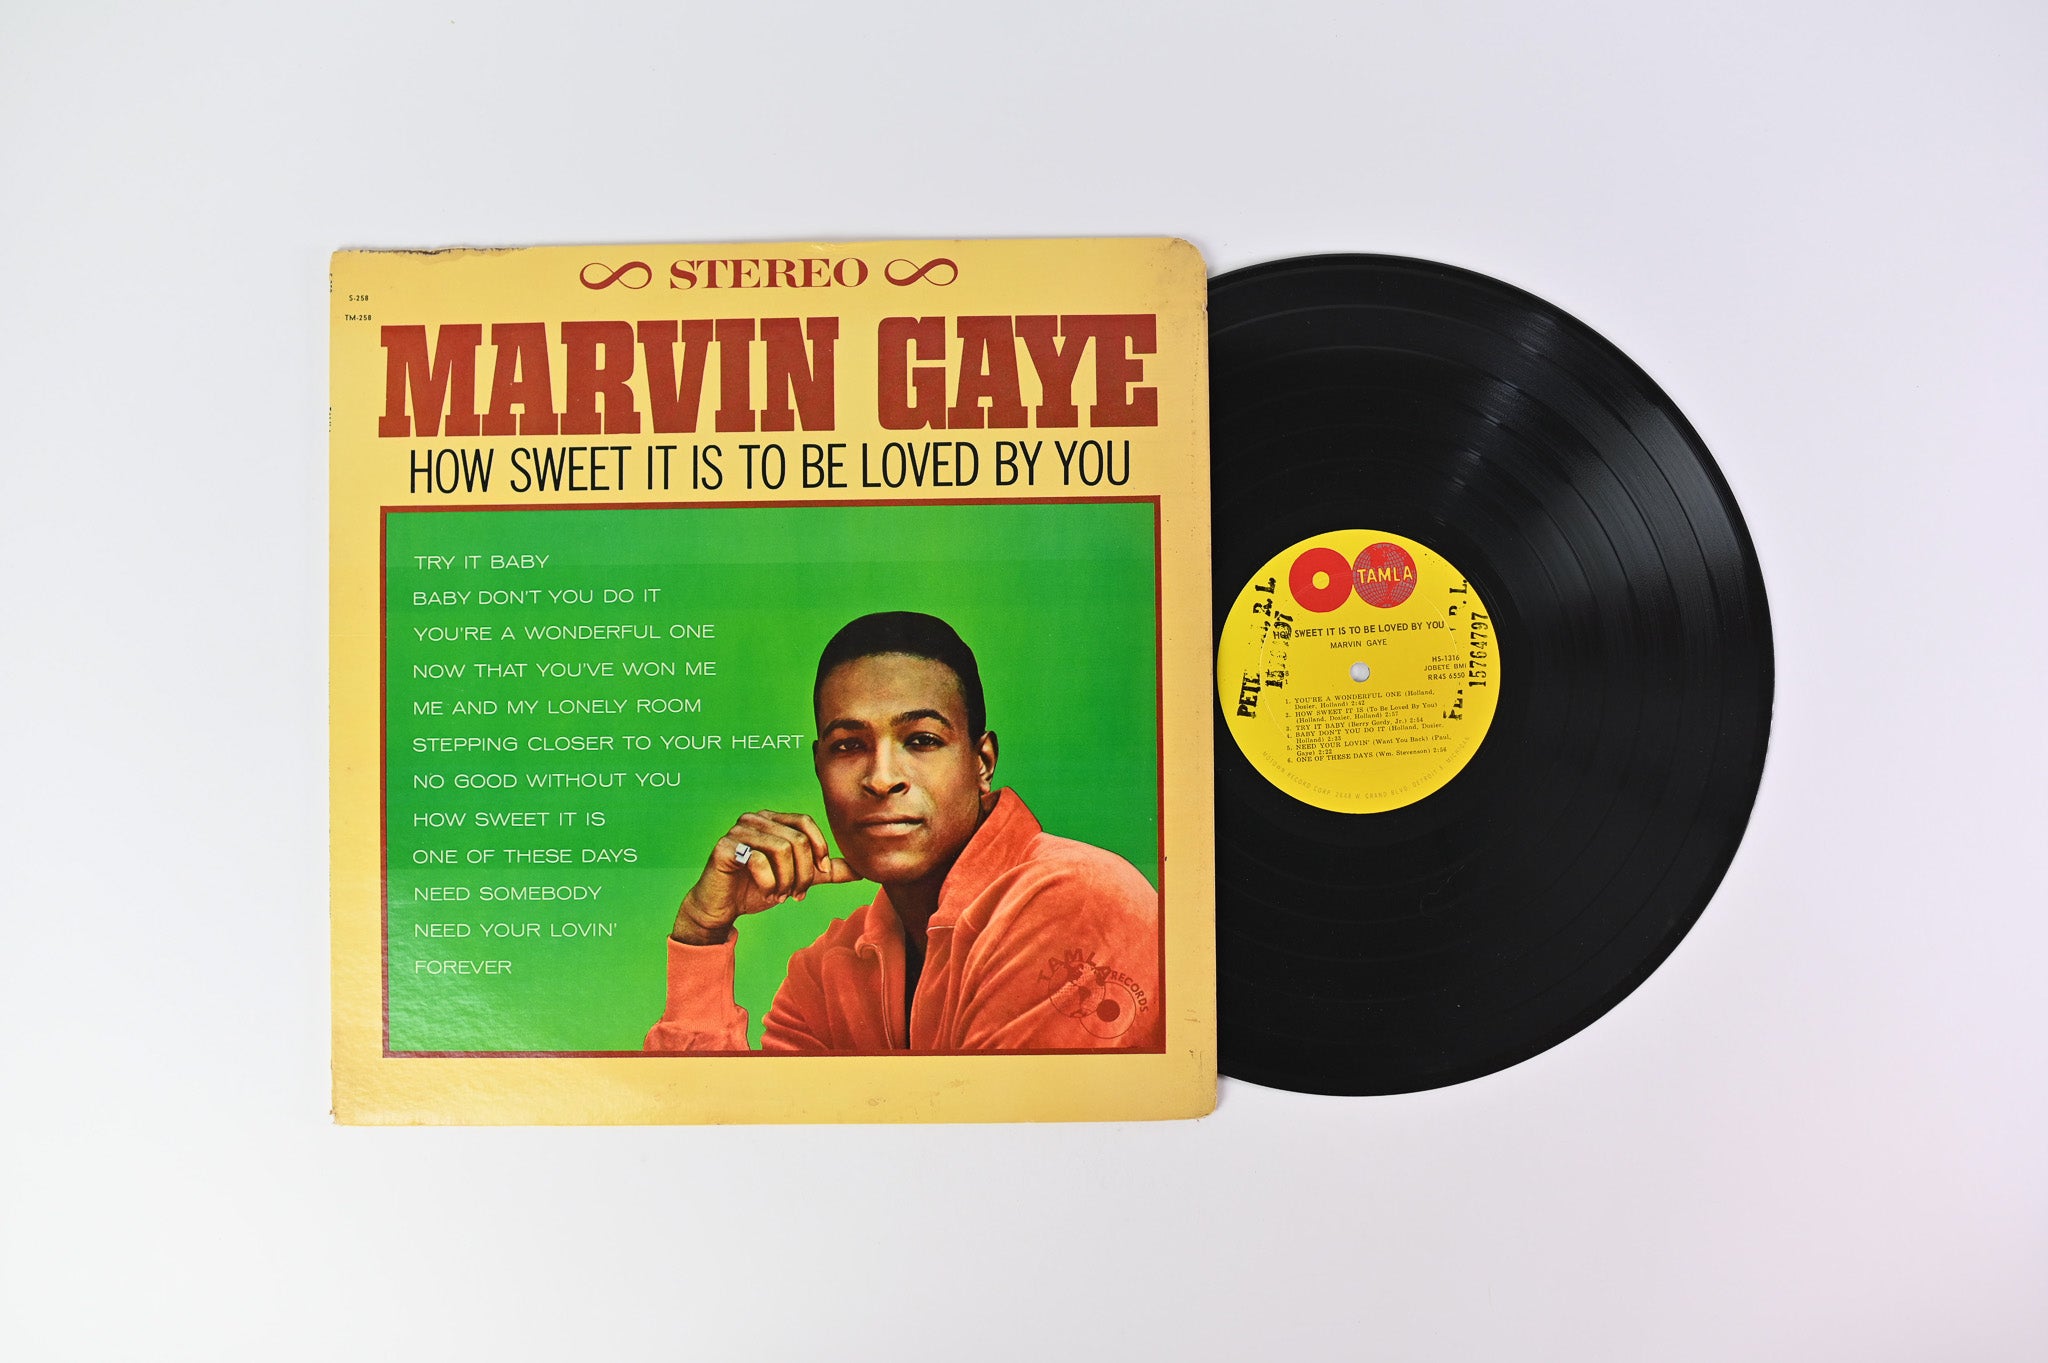 Marvin Gaye - How Sweet It Is To Be Loved By You on Tamla